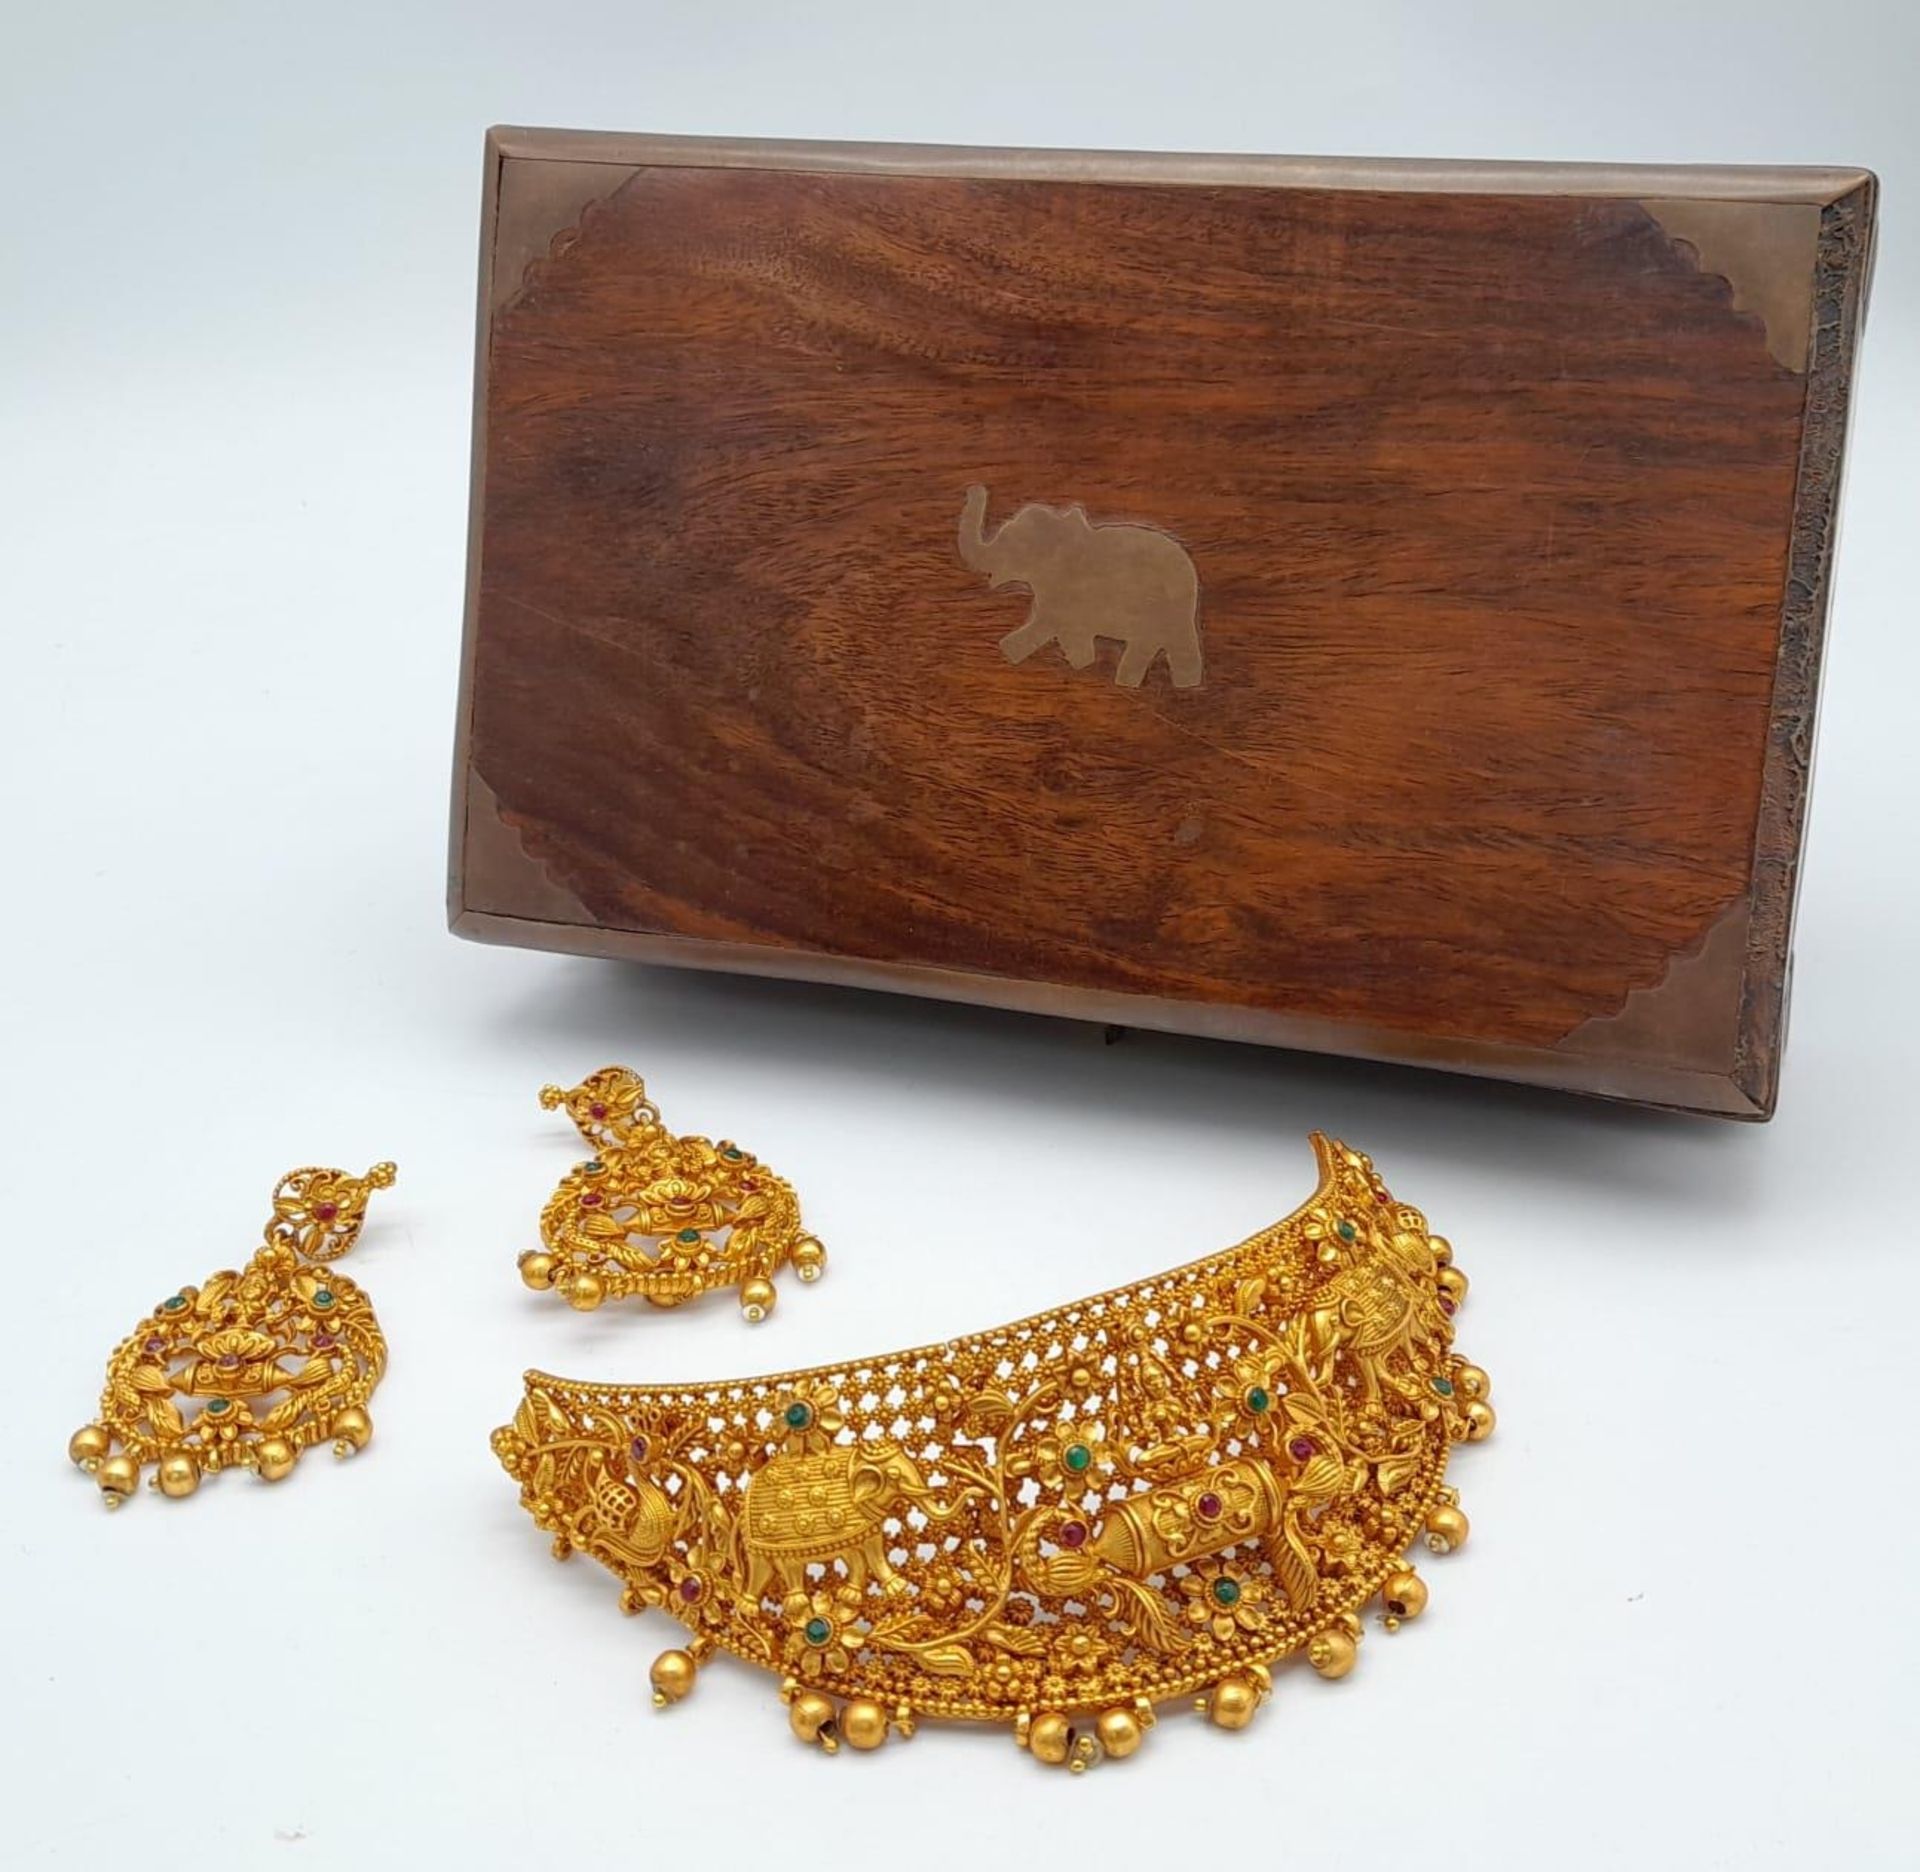 A South Indian traditional “Temple Jewellery” consisting of a necklace and matching earrings in an - Image 2 of 6